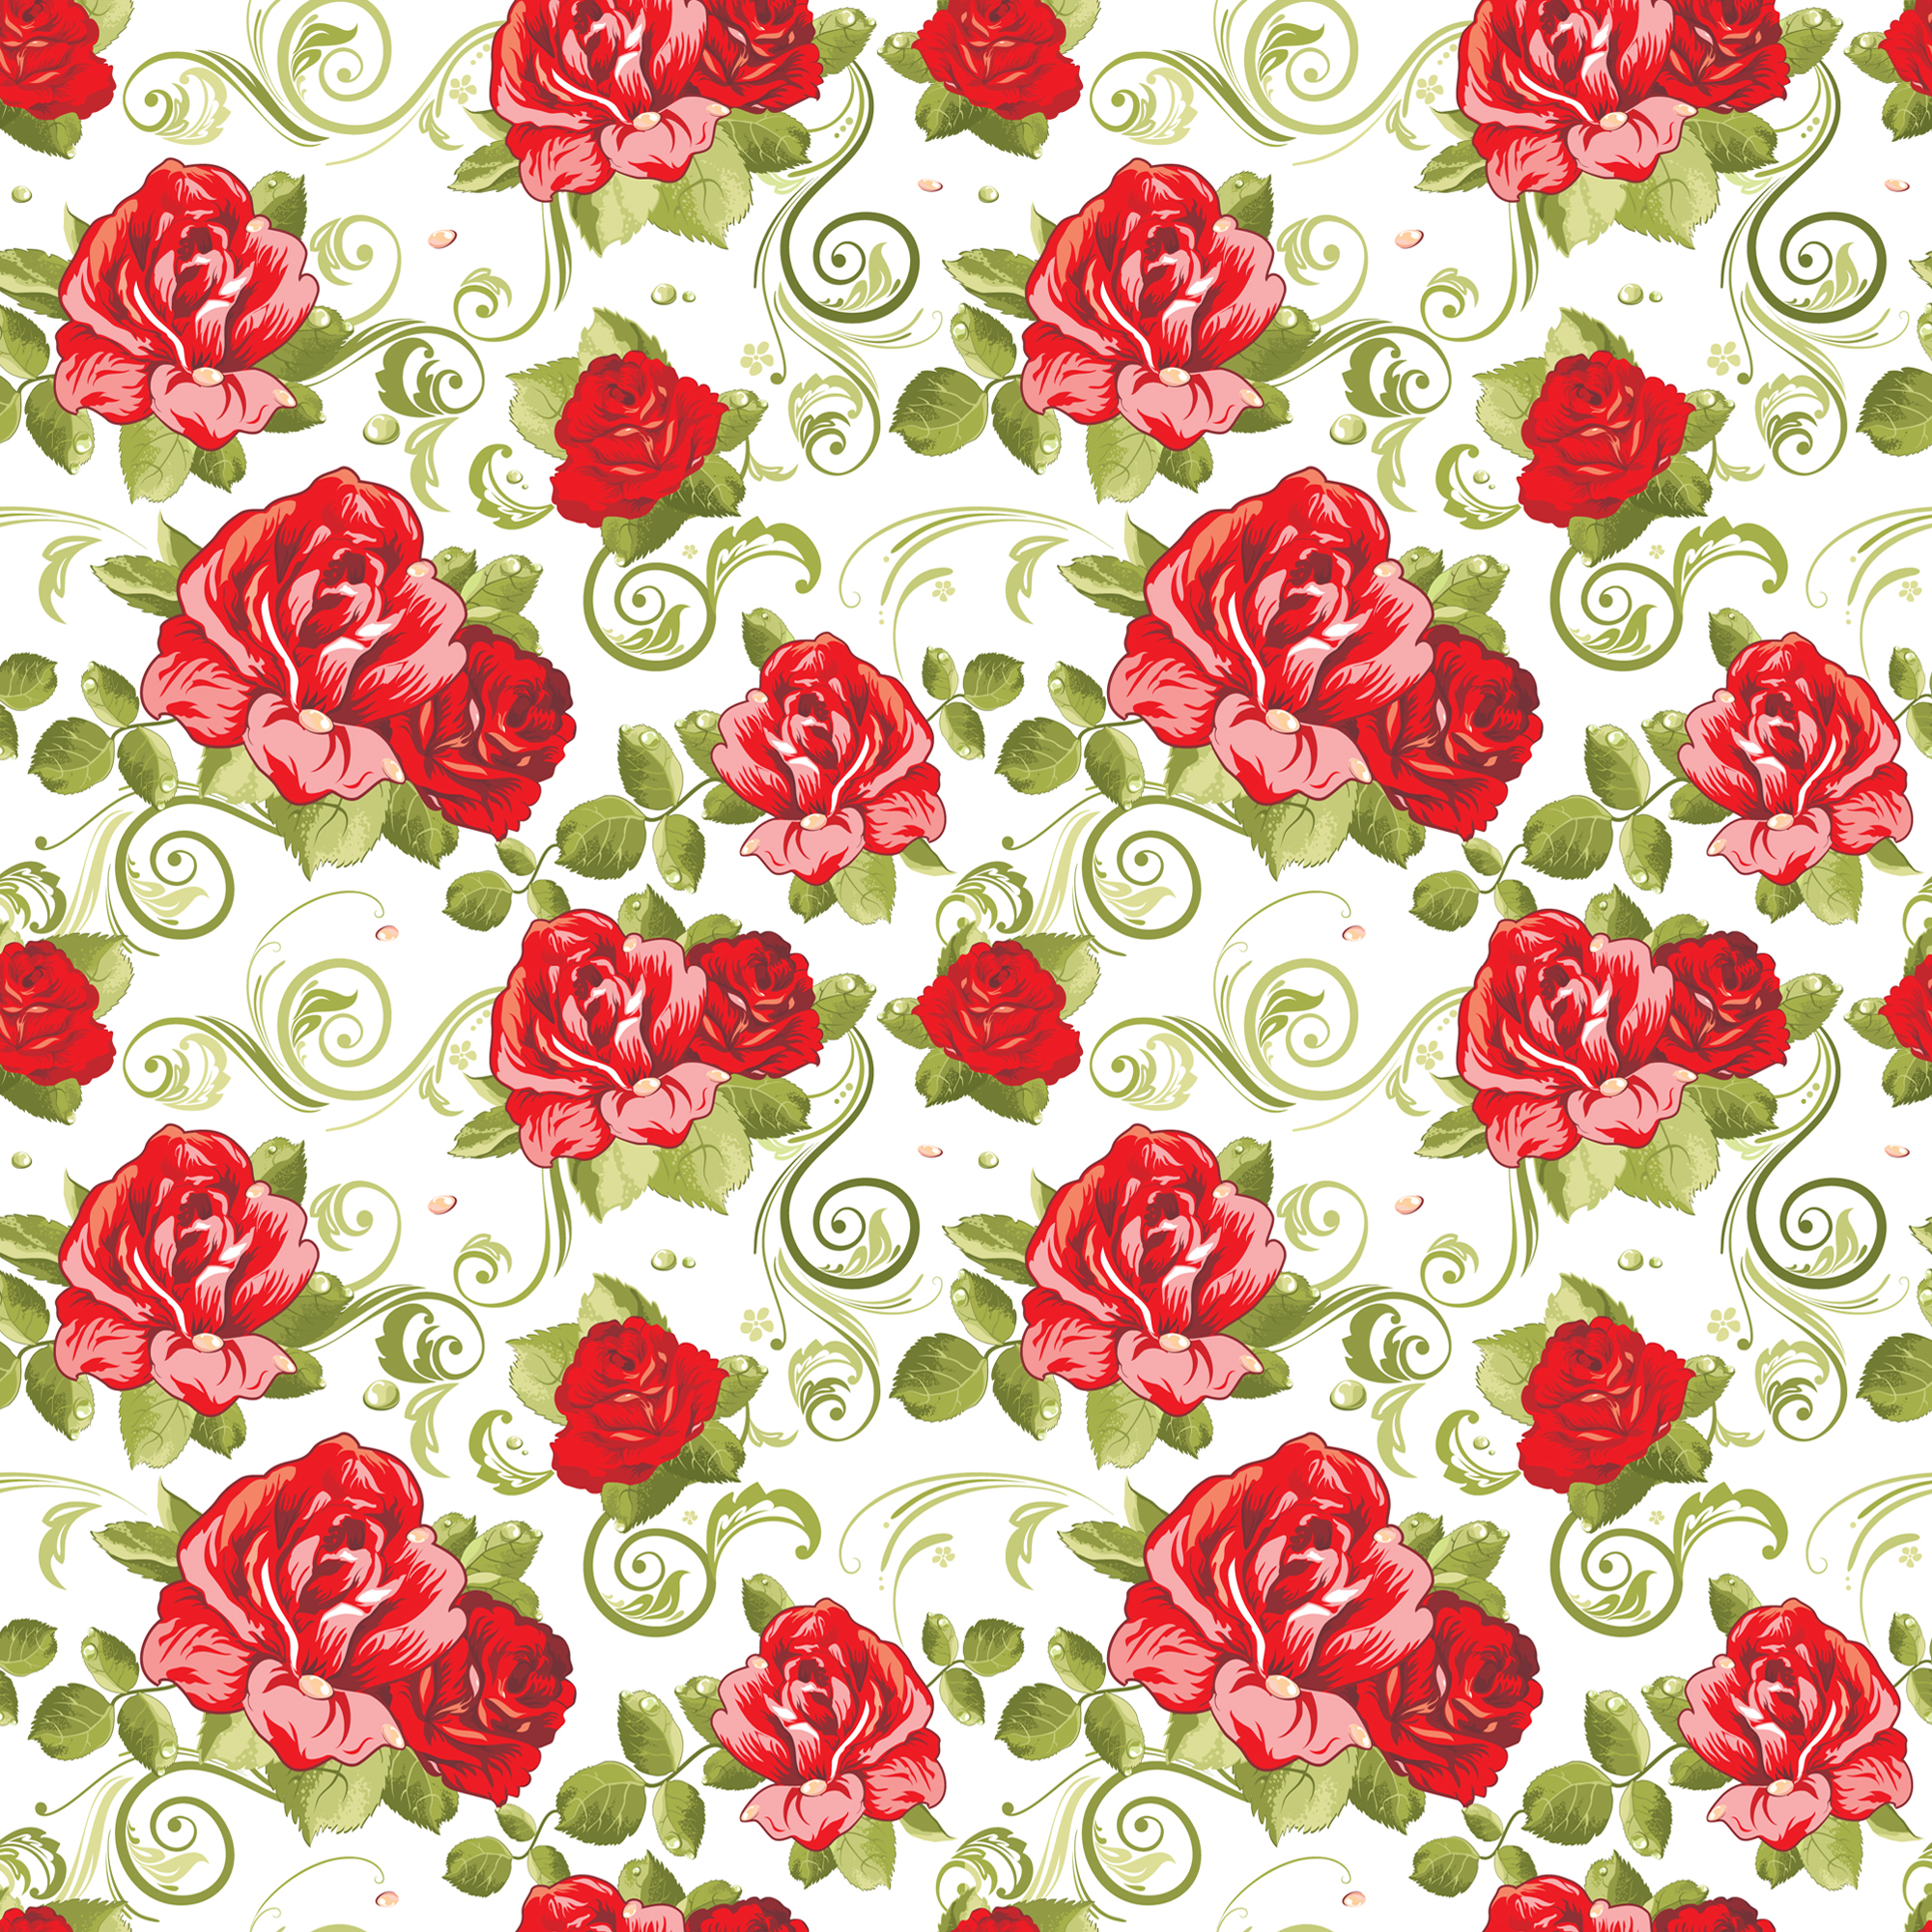 HD wallpaper background, pictures, roses, flowers, patterns